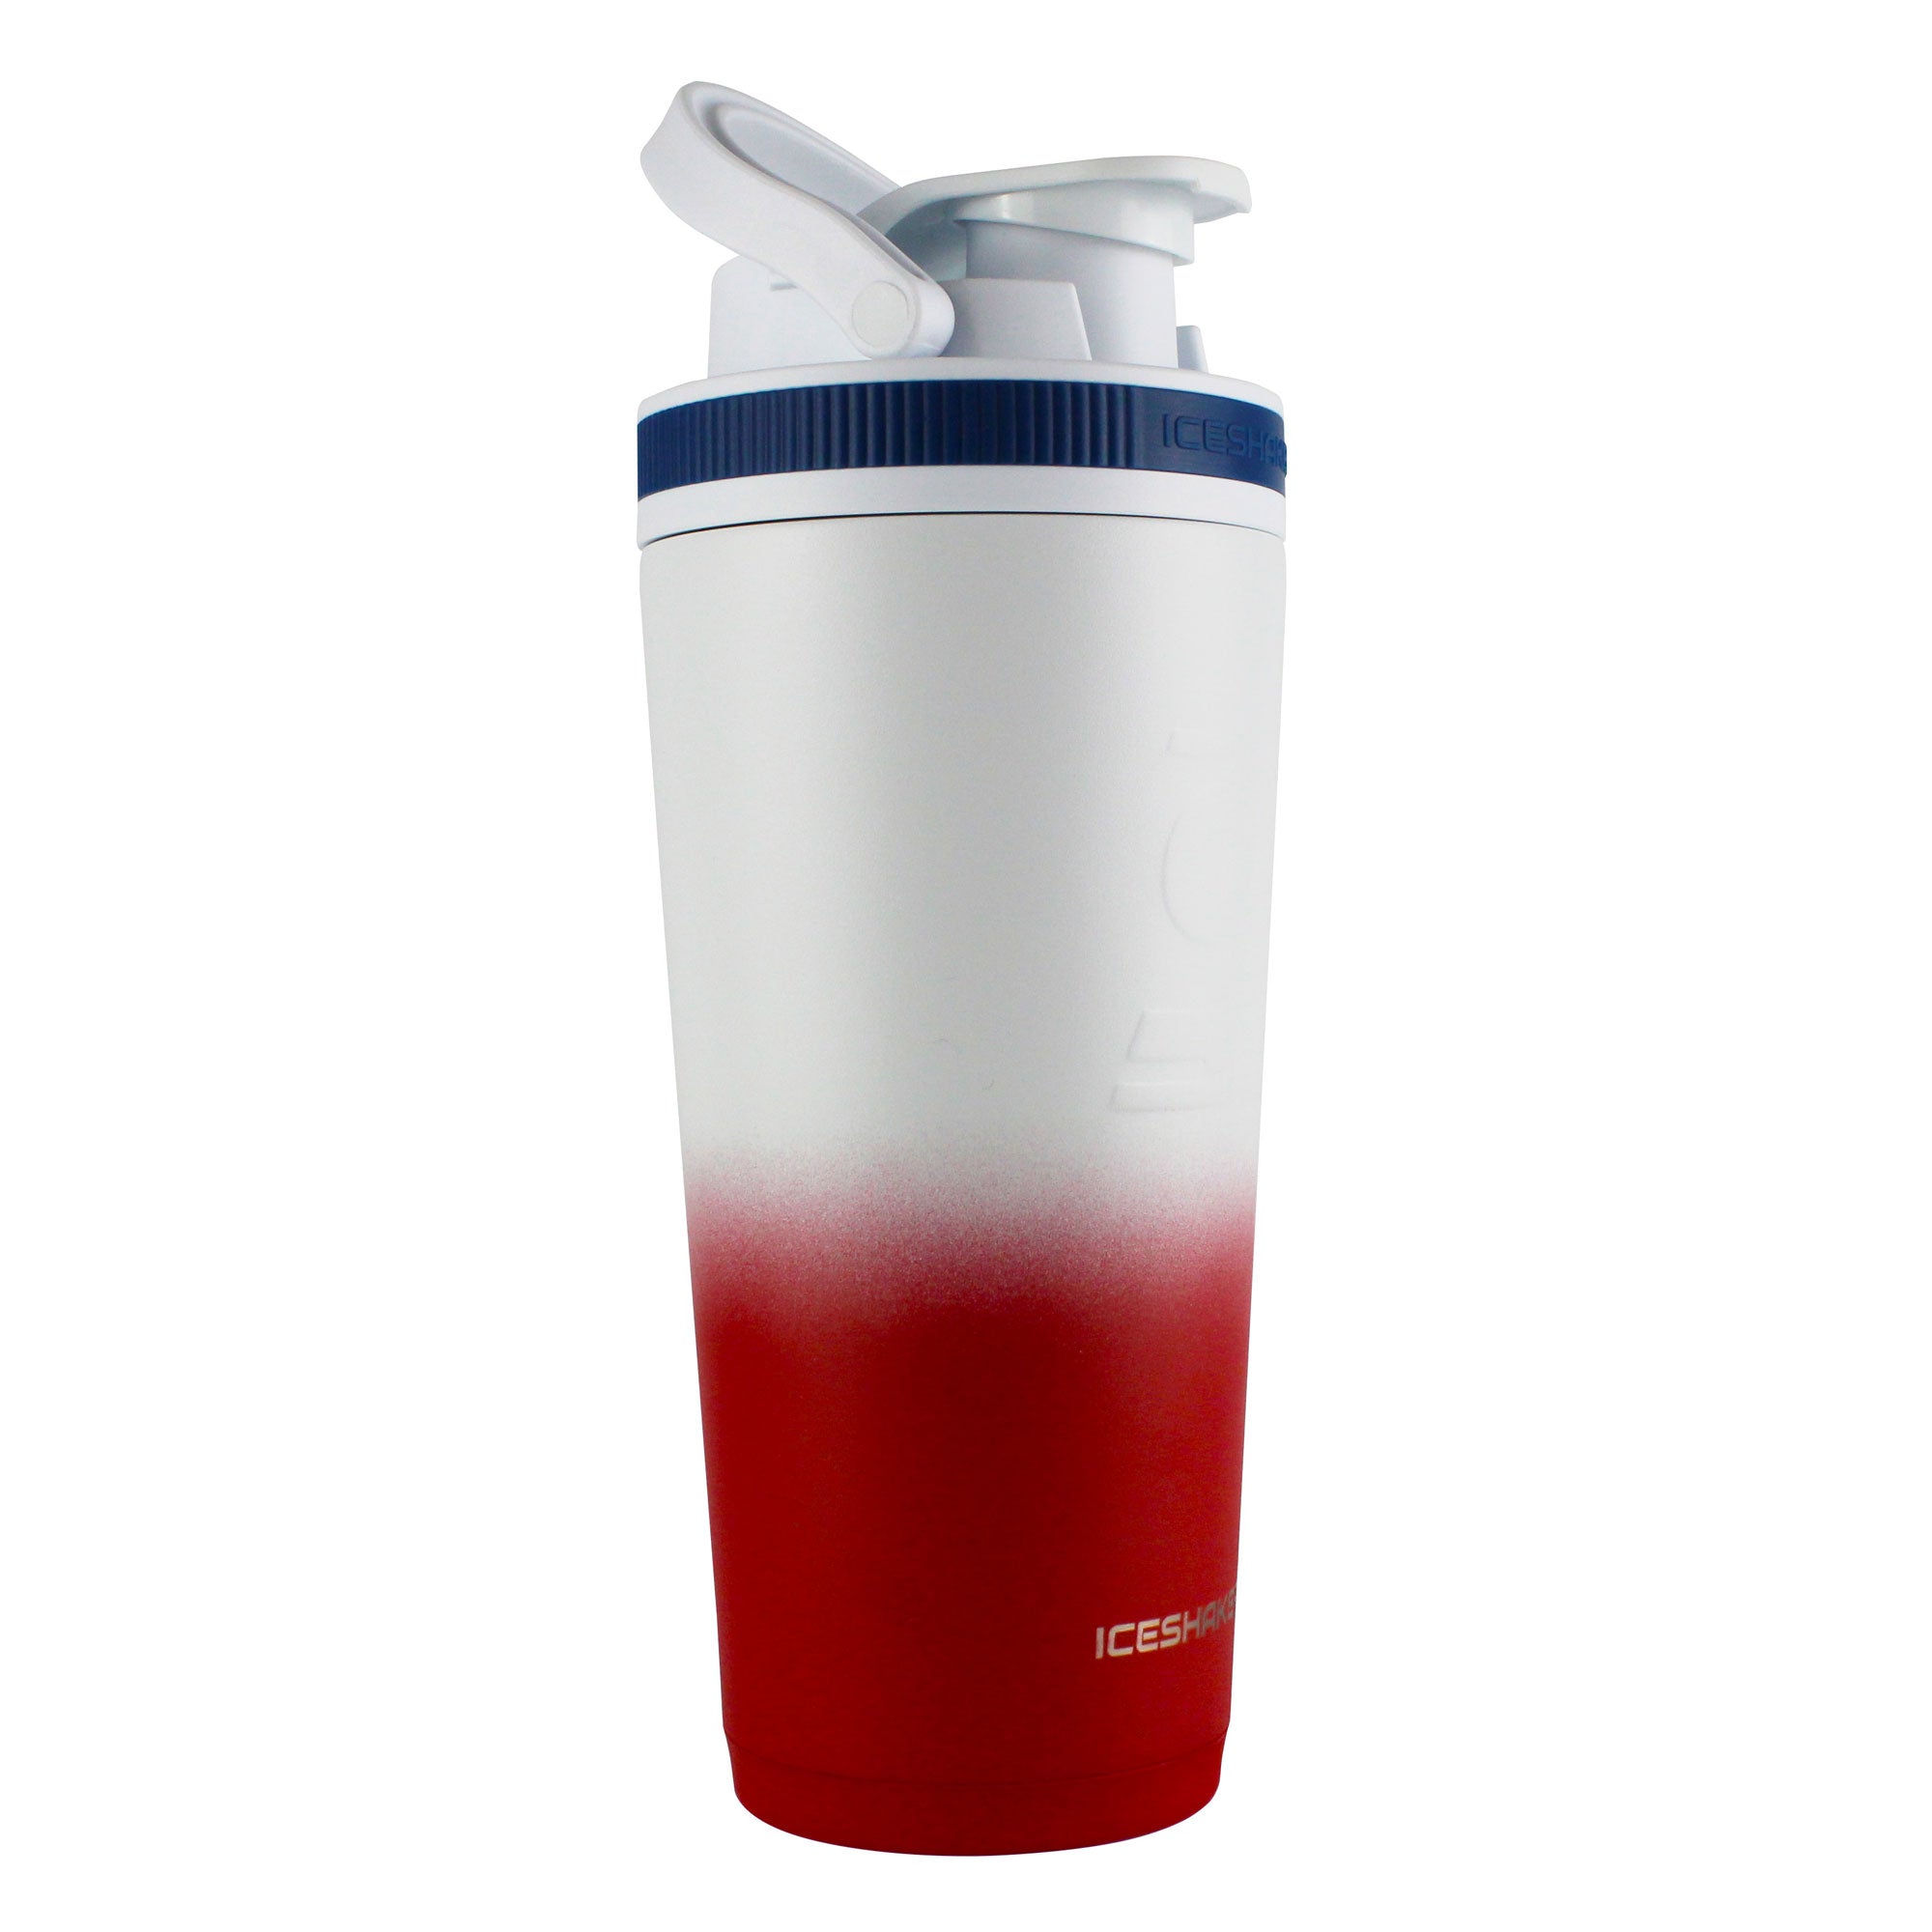 Ice Shaker: The Insulated Shaker Bottle That Keeps Your Drink Cold